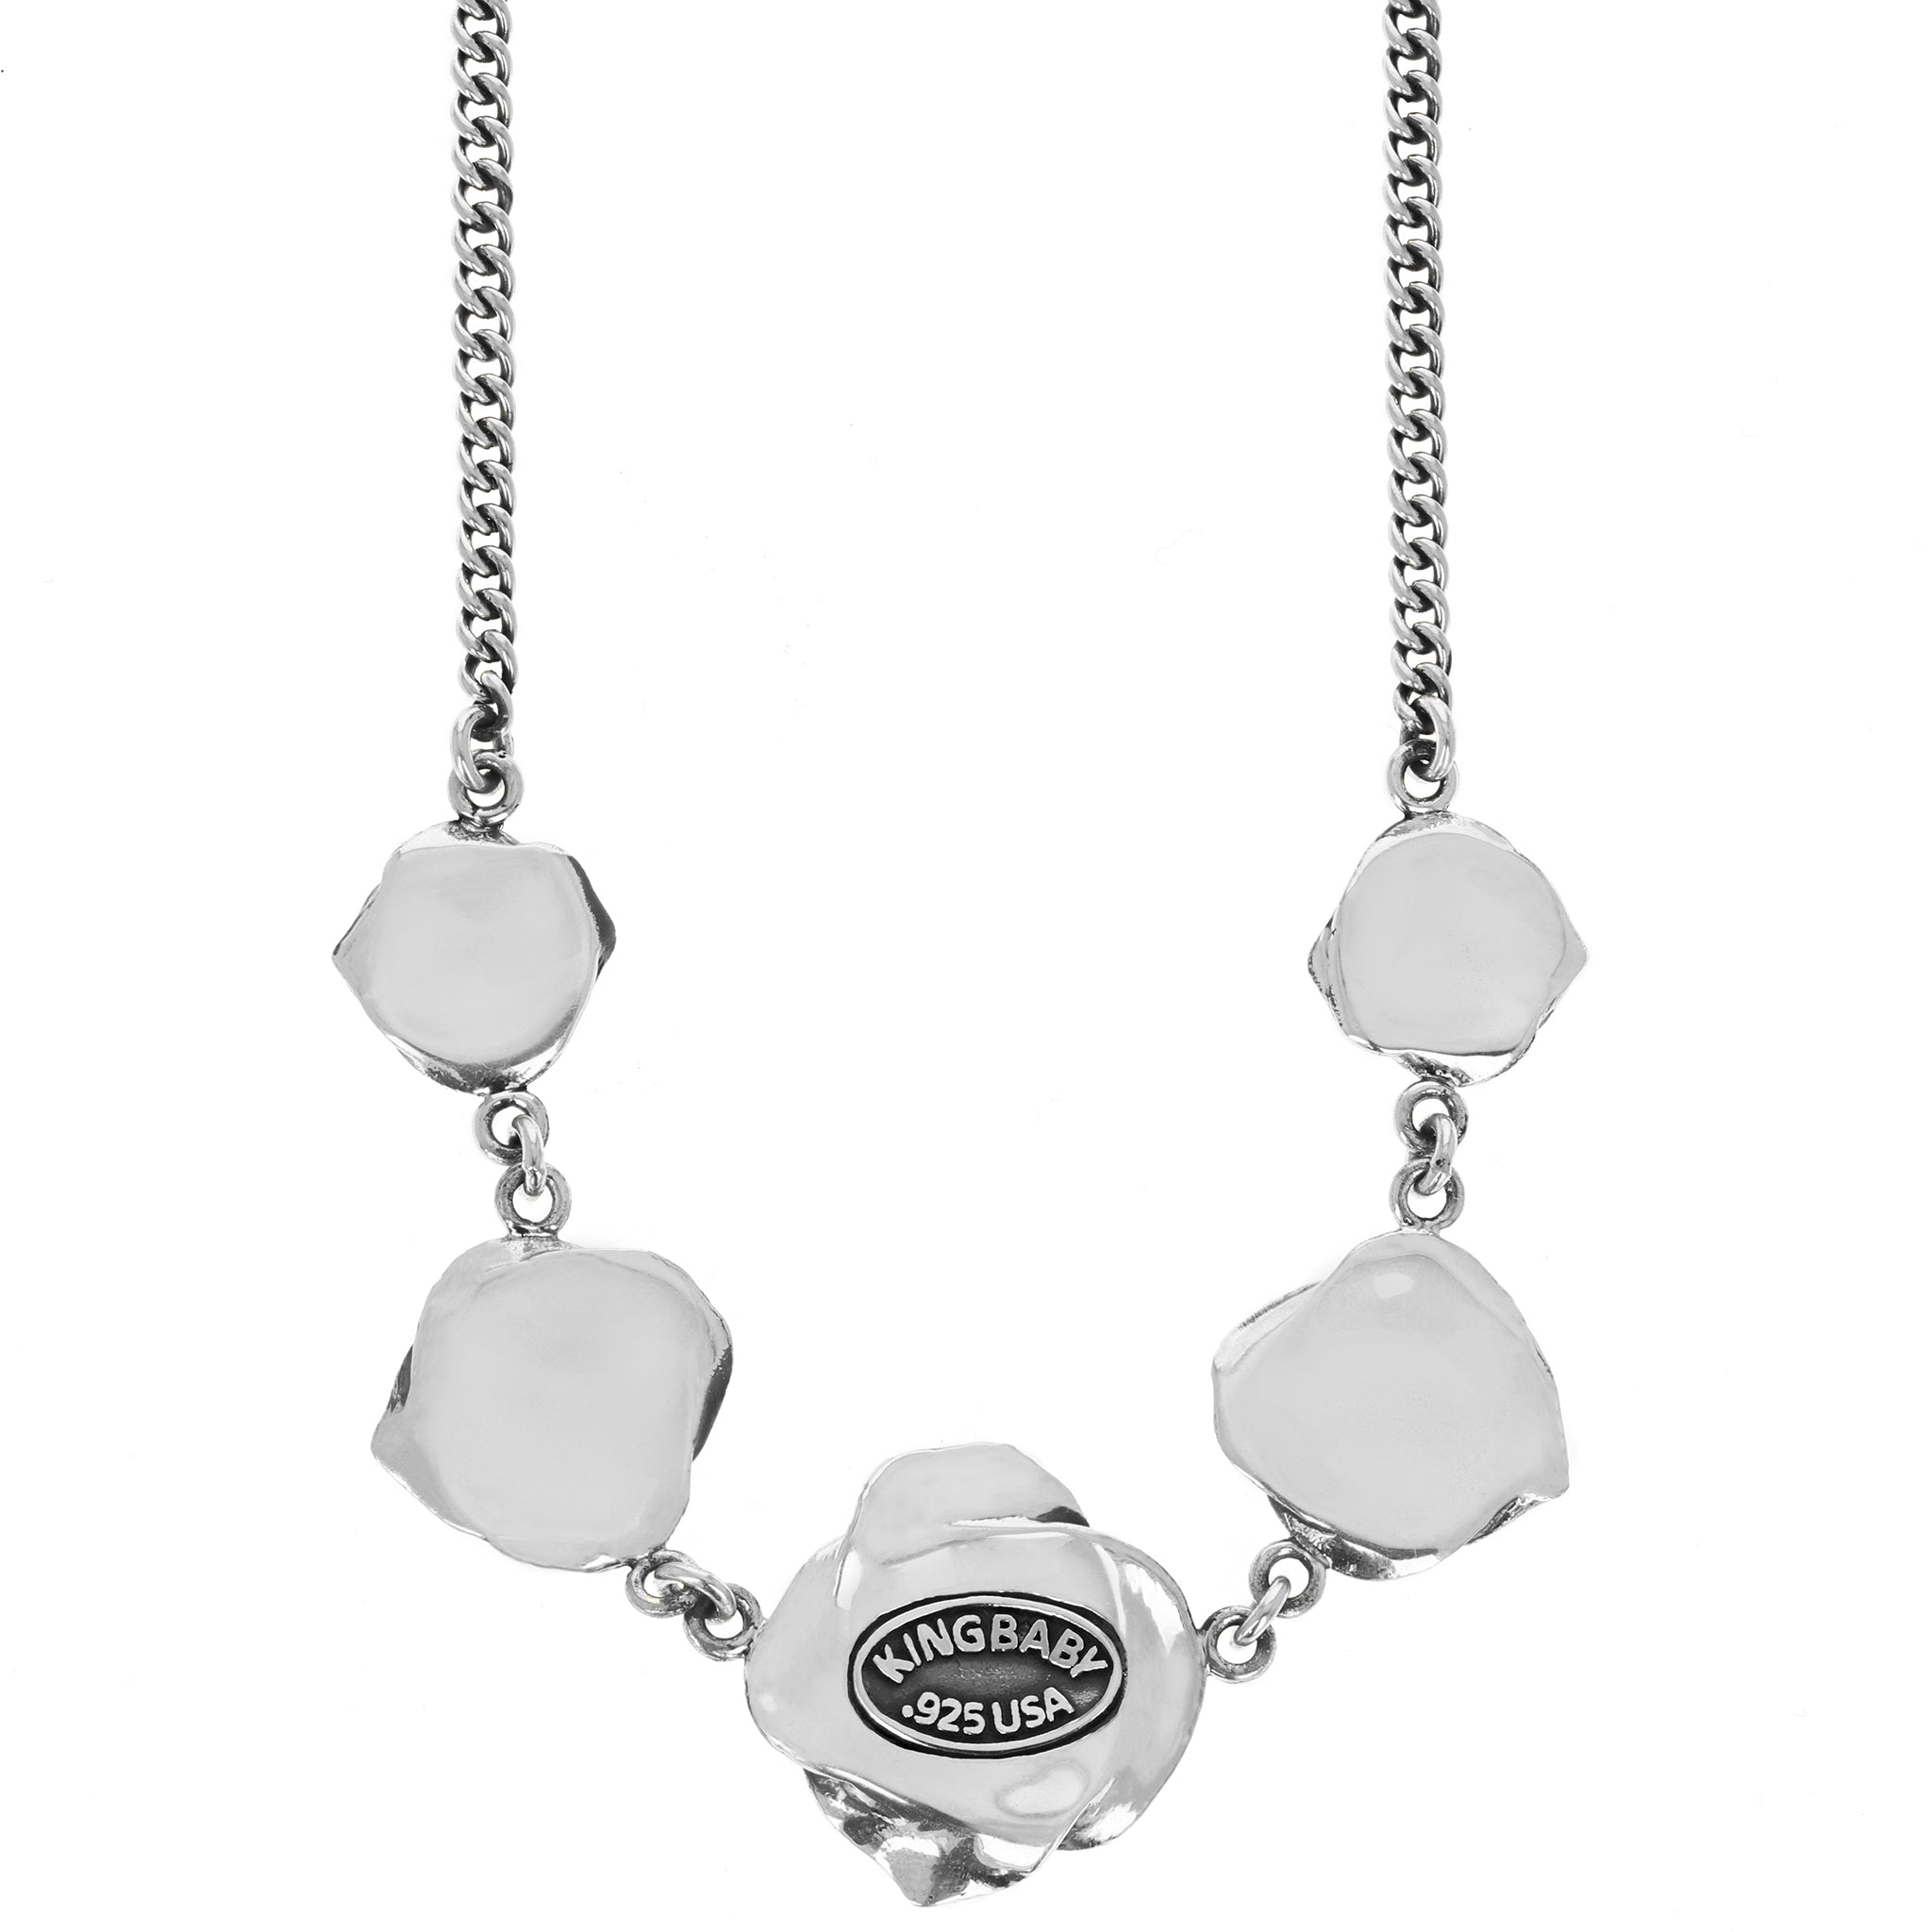 Curblink Chain Necklace with Five Silver Roses